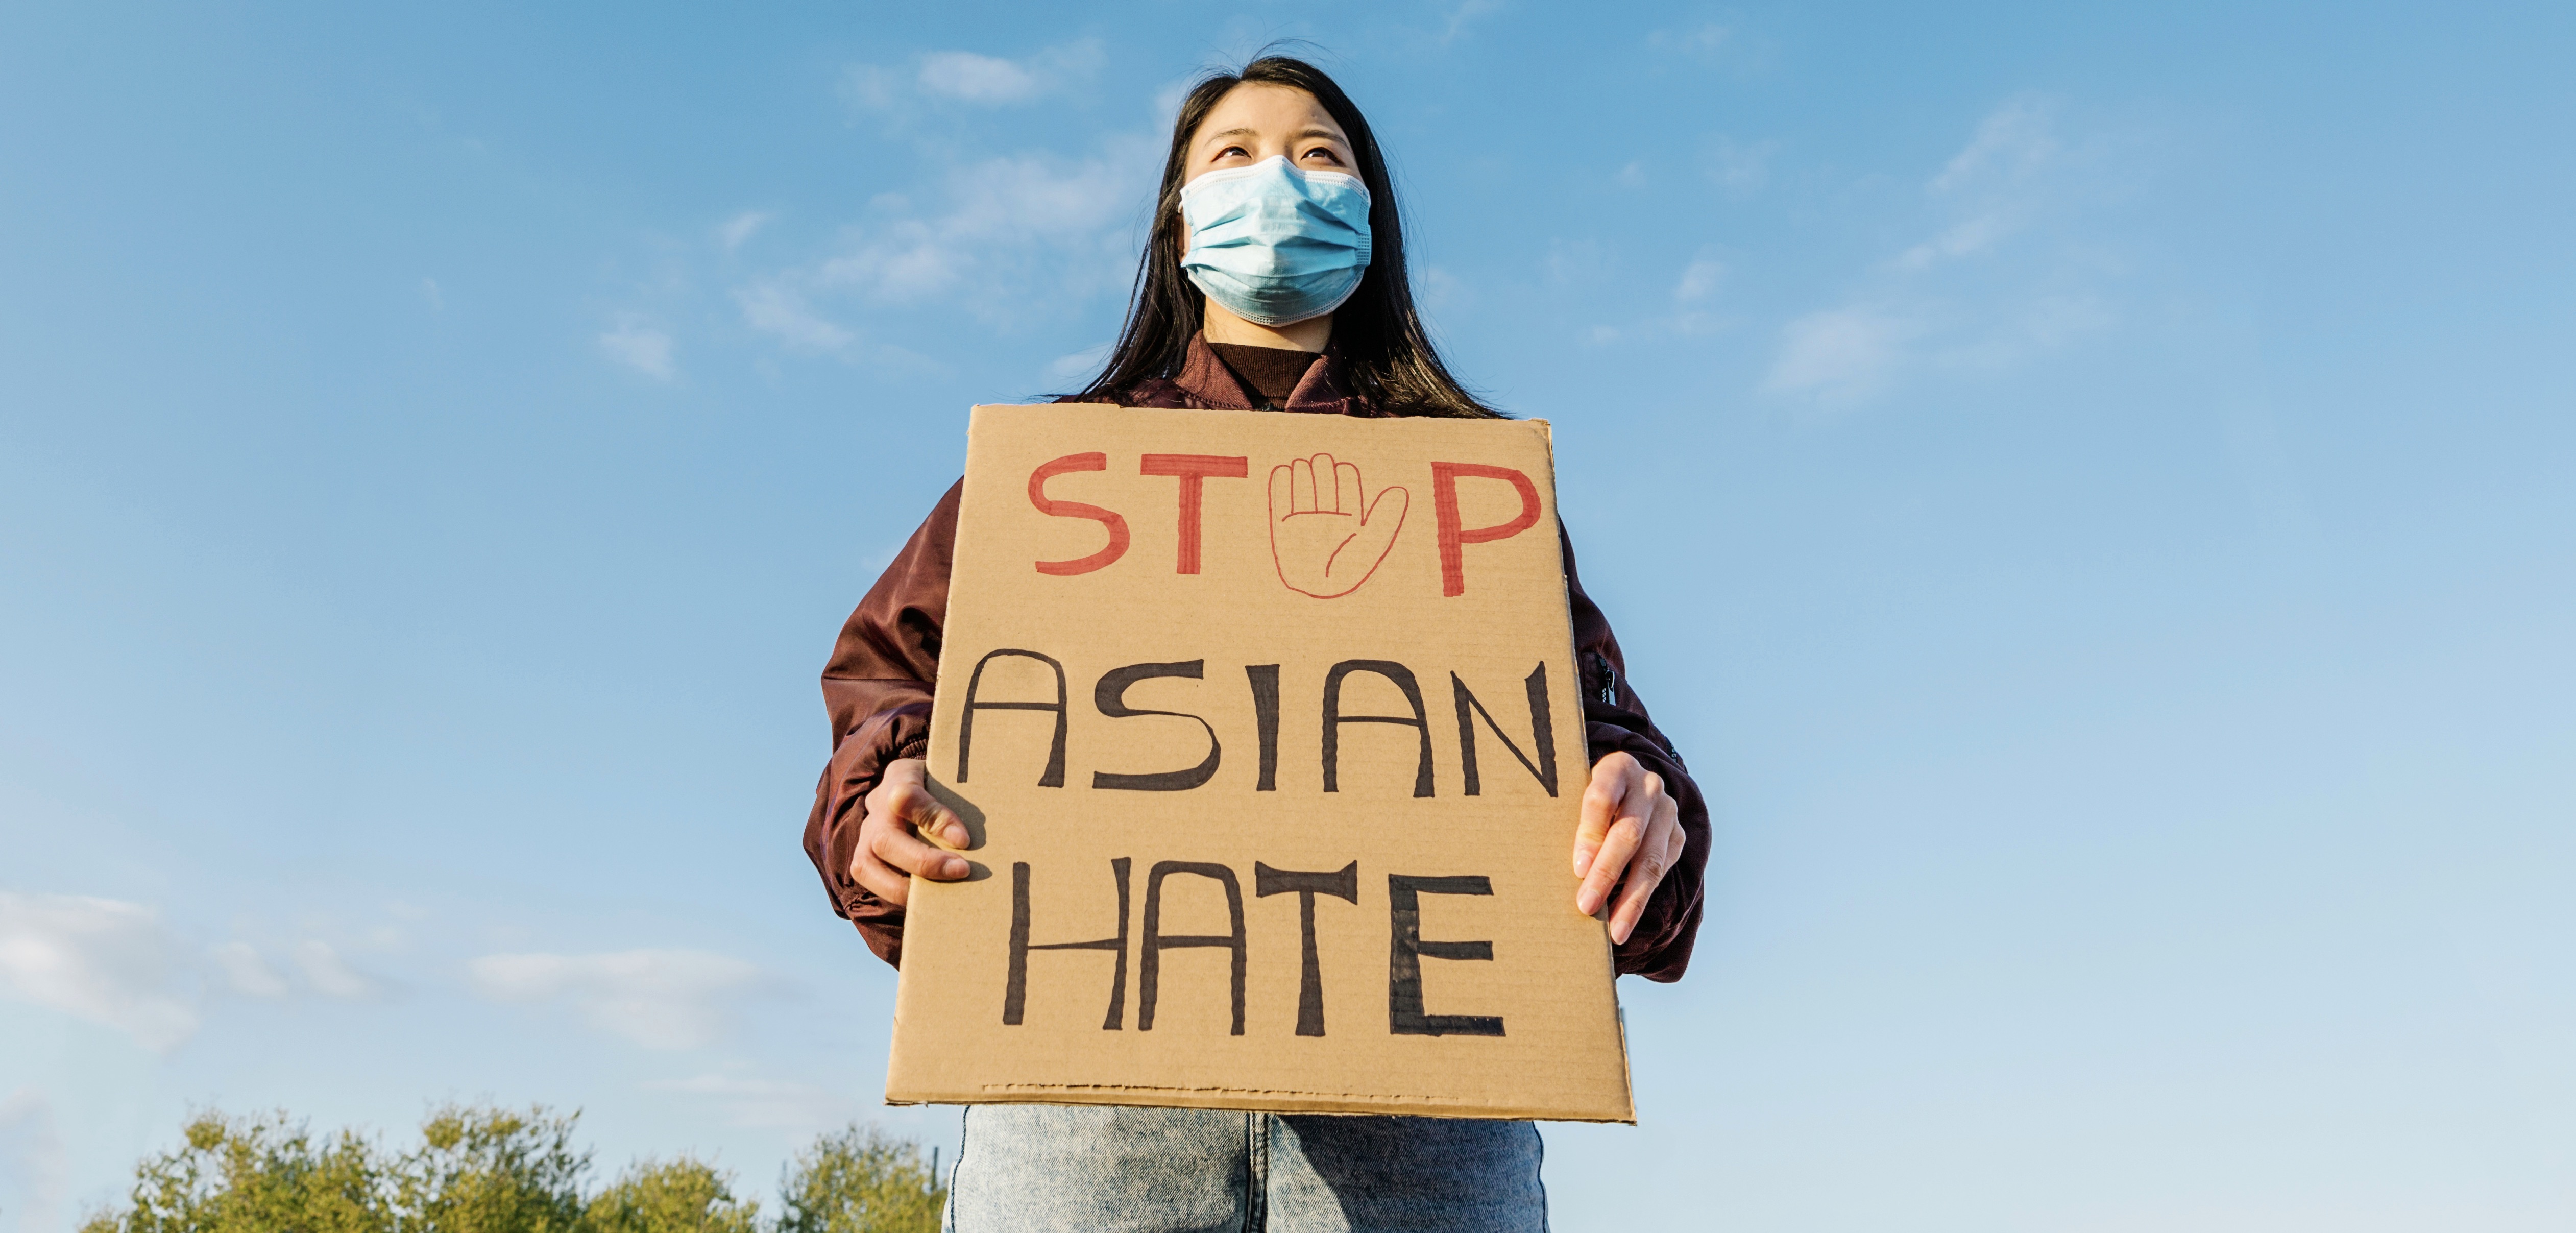 Young Chinese woman protesting against hate in the outbreak situation of coronavirus infection or Covid-19 - Stop asian hate fight campaign